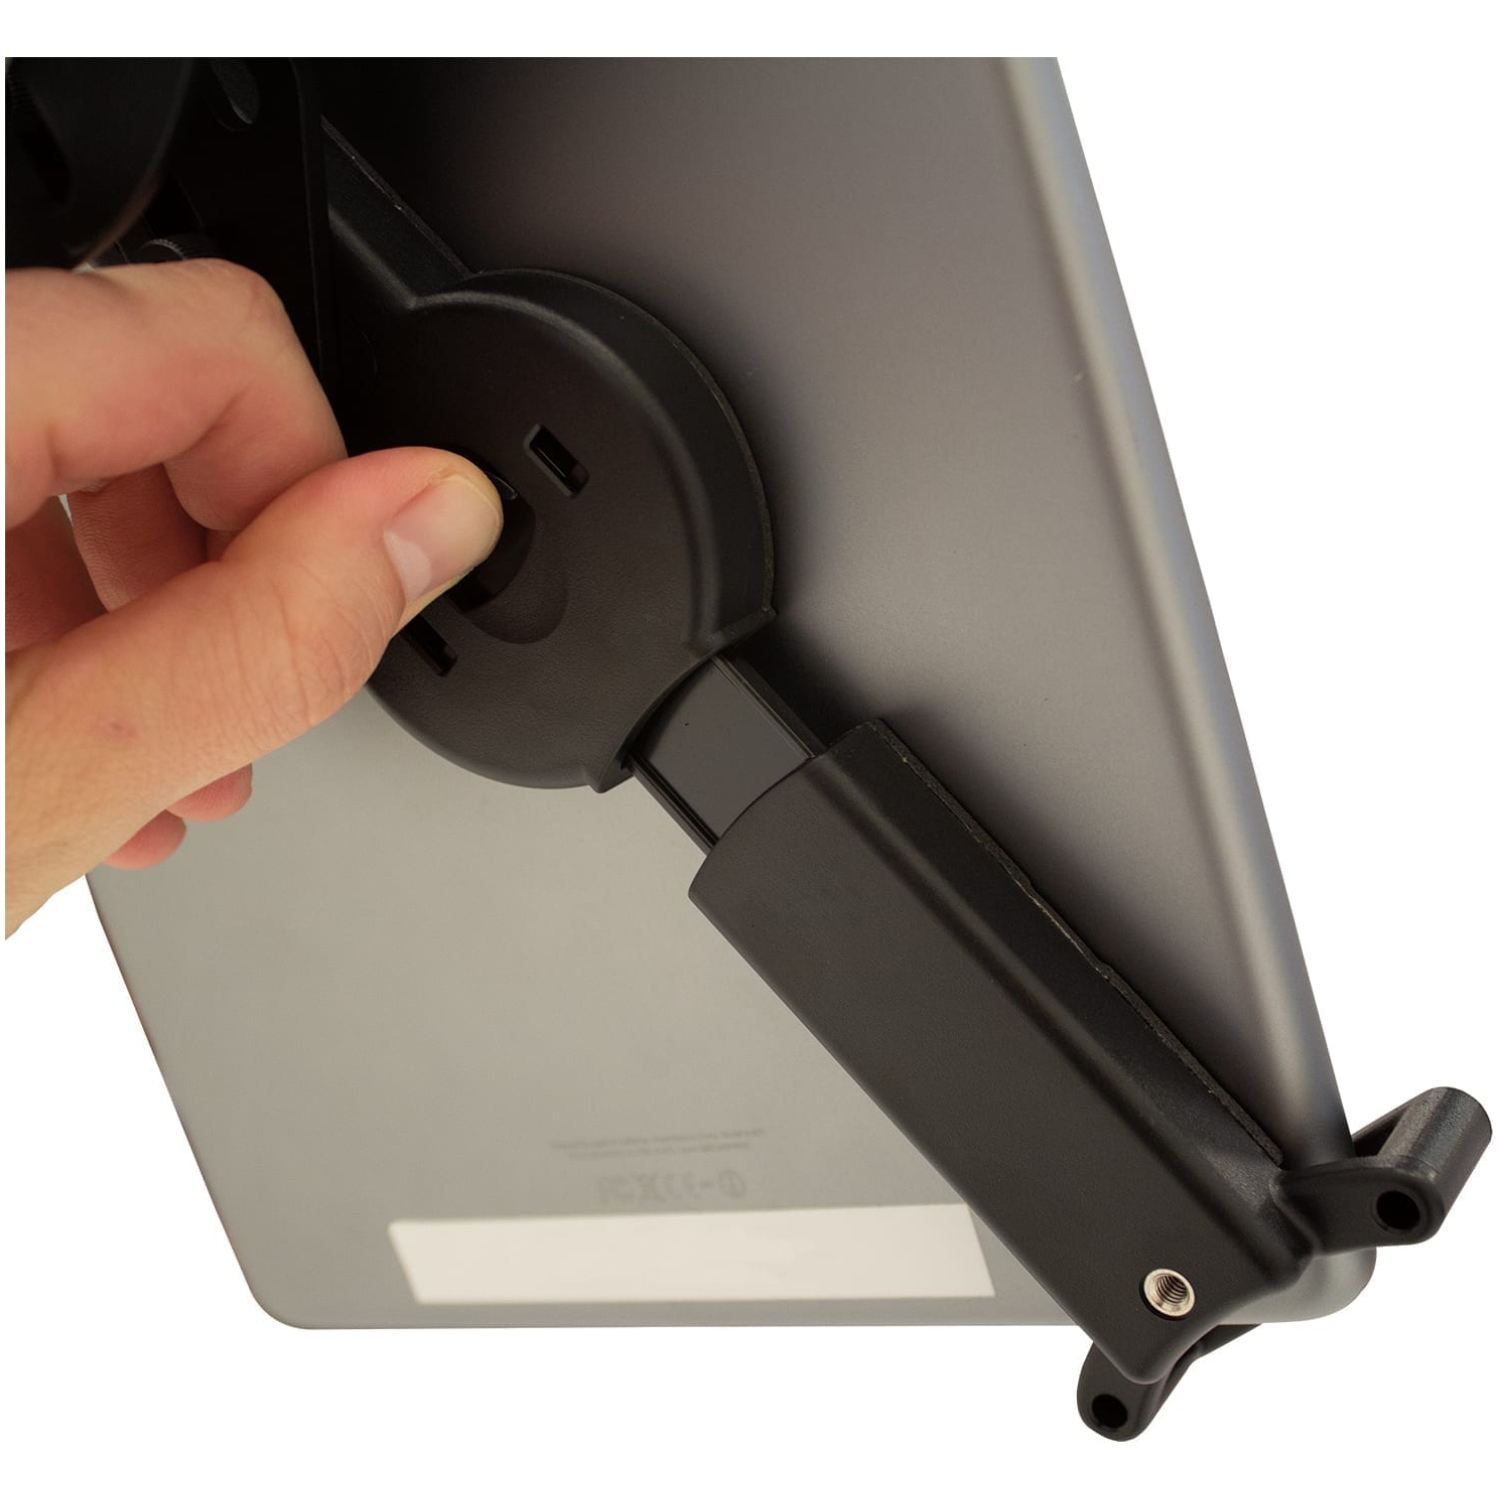 Sail Tablet Stand Hardware